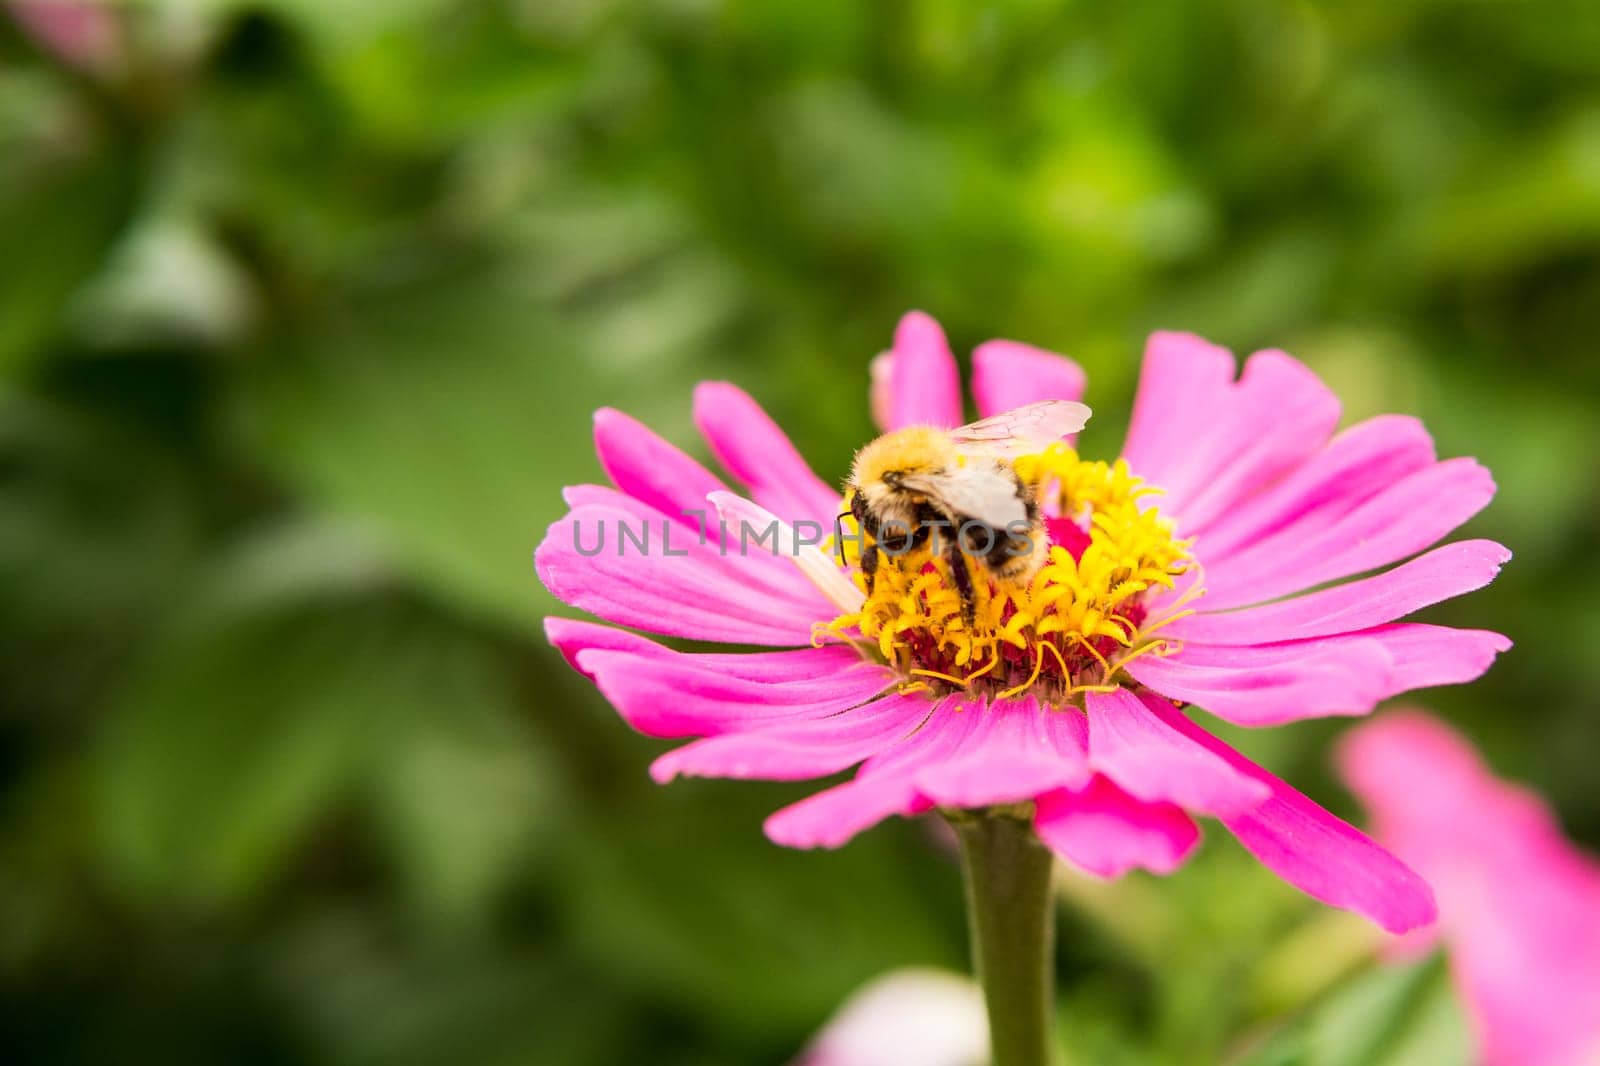 Beautiful pink flowers growing in the garden. Gardening concept, close-up. The flower is pollinated by a bumblebee